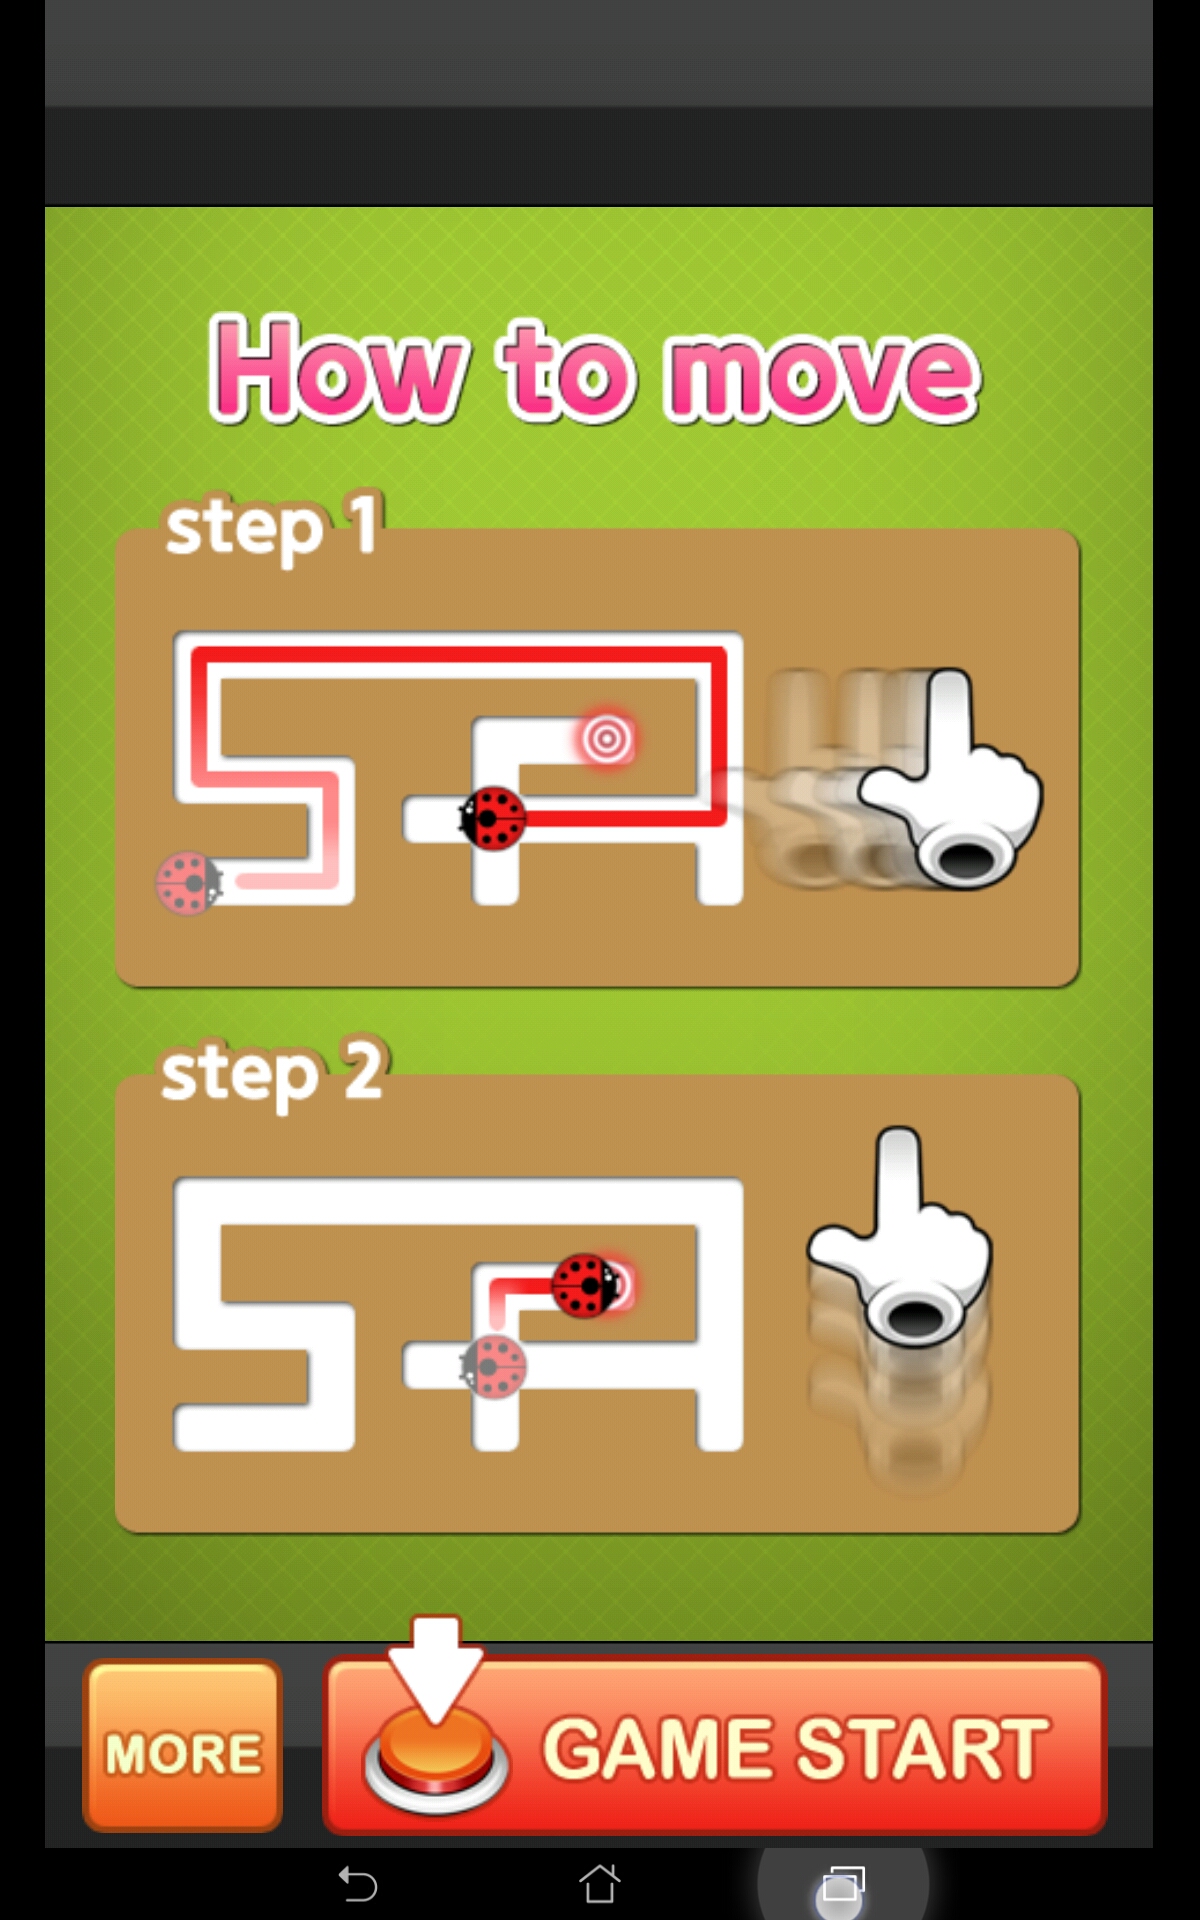 Tutorial screenshot explaining how to move with a mazi visual and a hand showing the motion to perform.